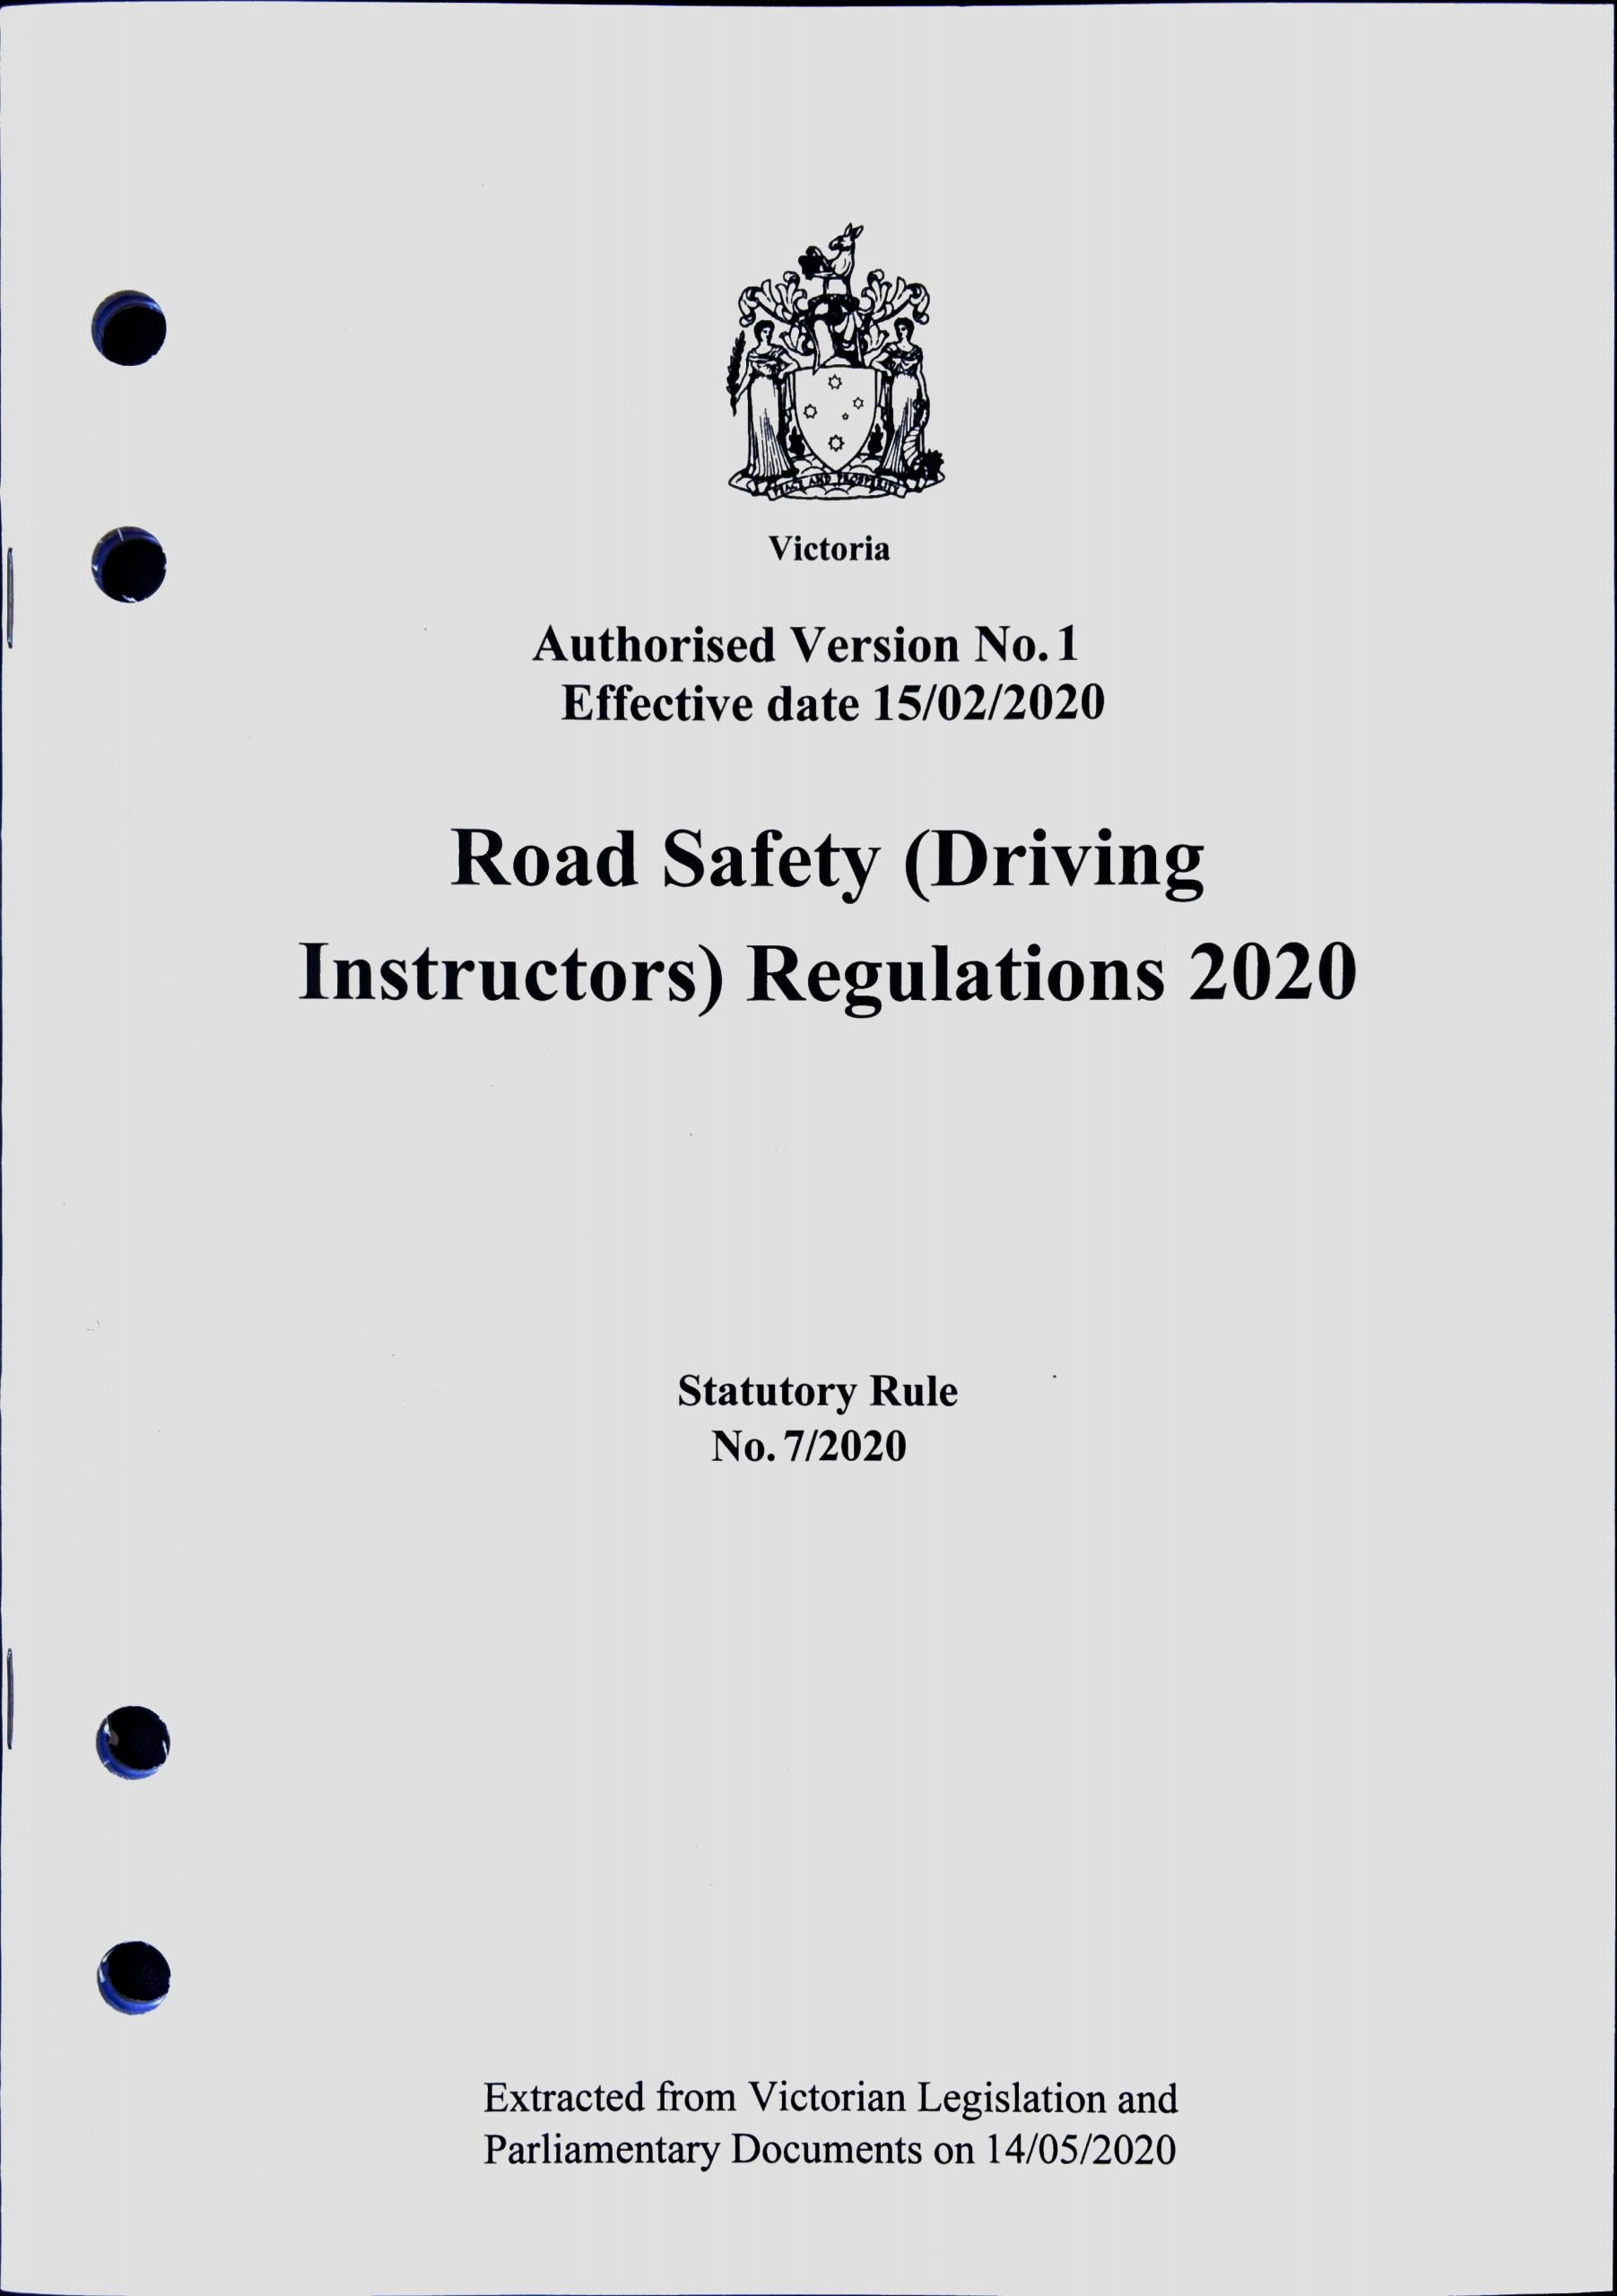 Road Safety (Driving Instructors) Regulations 2020